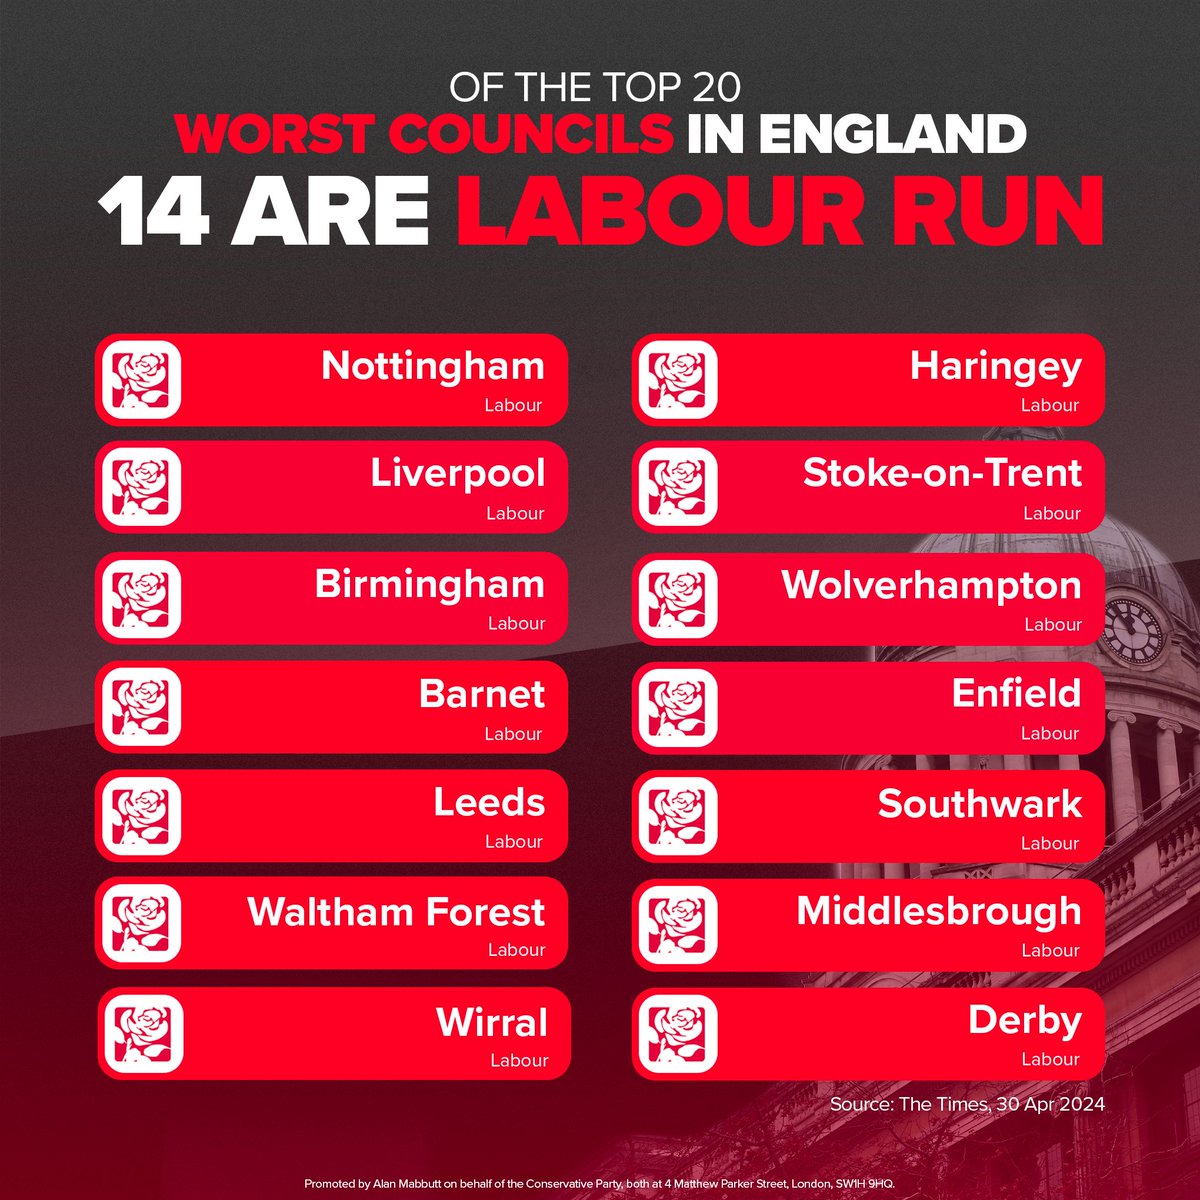 Don't let your area end up on this list 👇 Vote for the Conservatives today for better services and lower taxes.